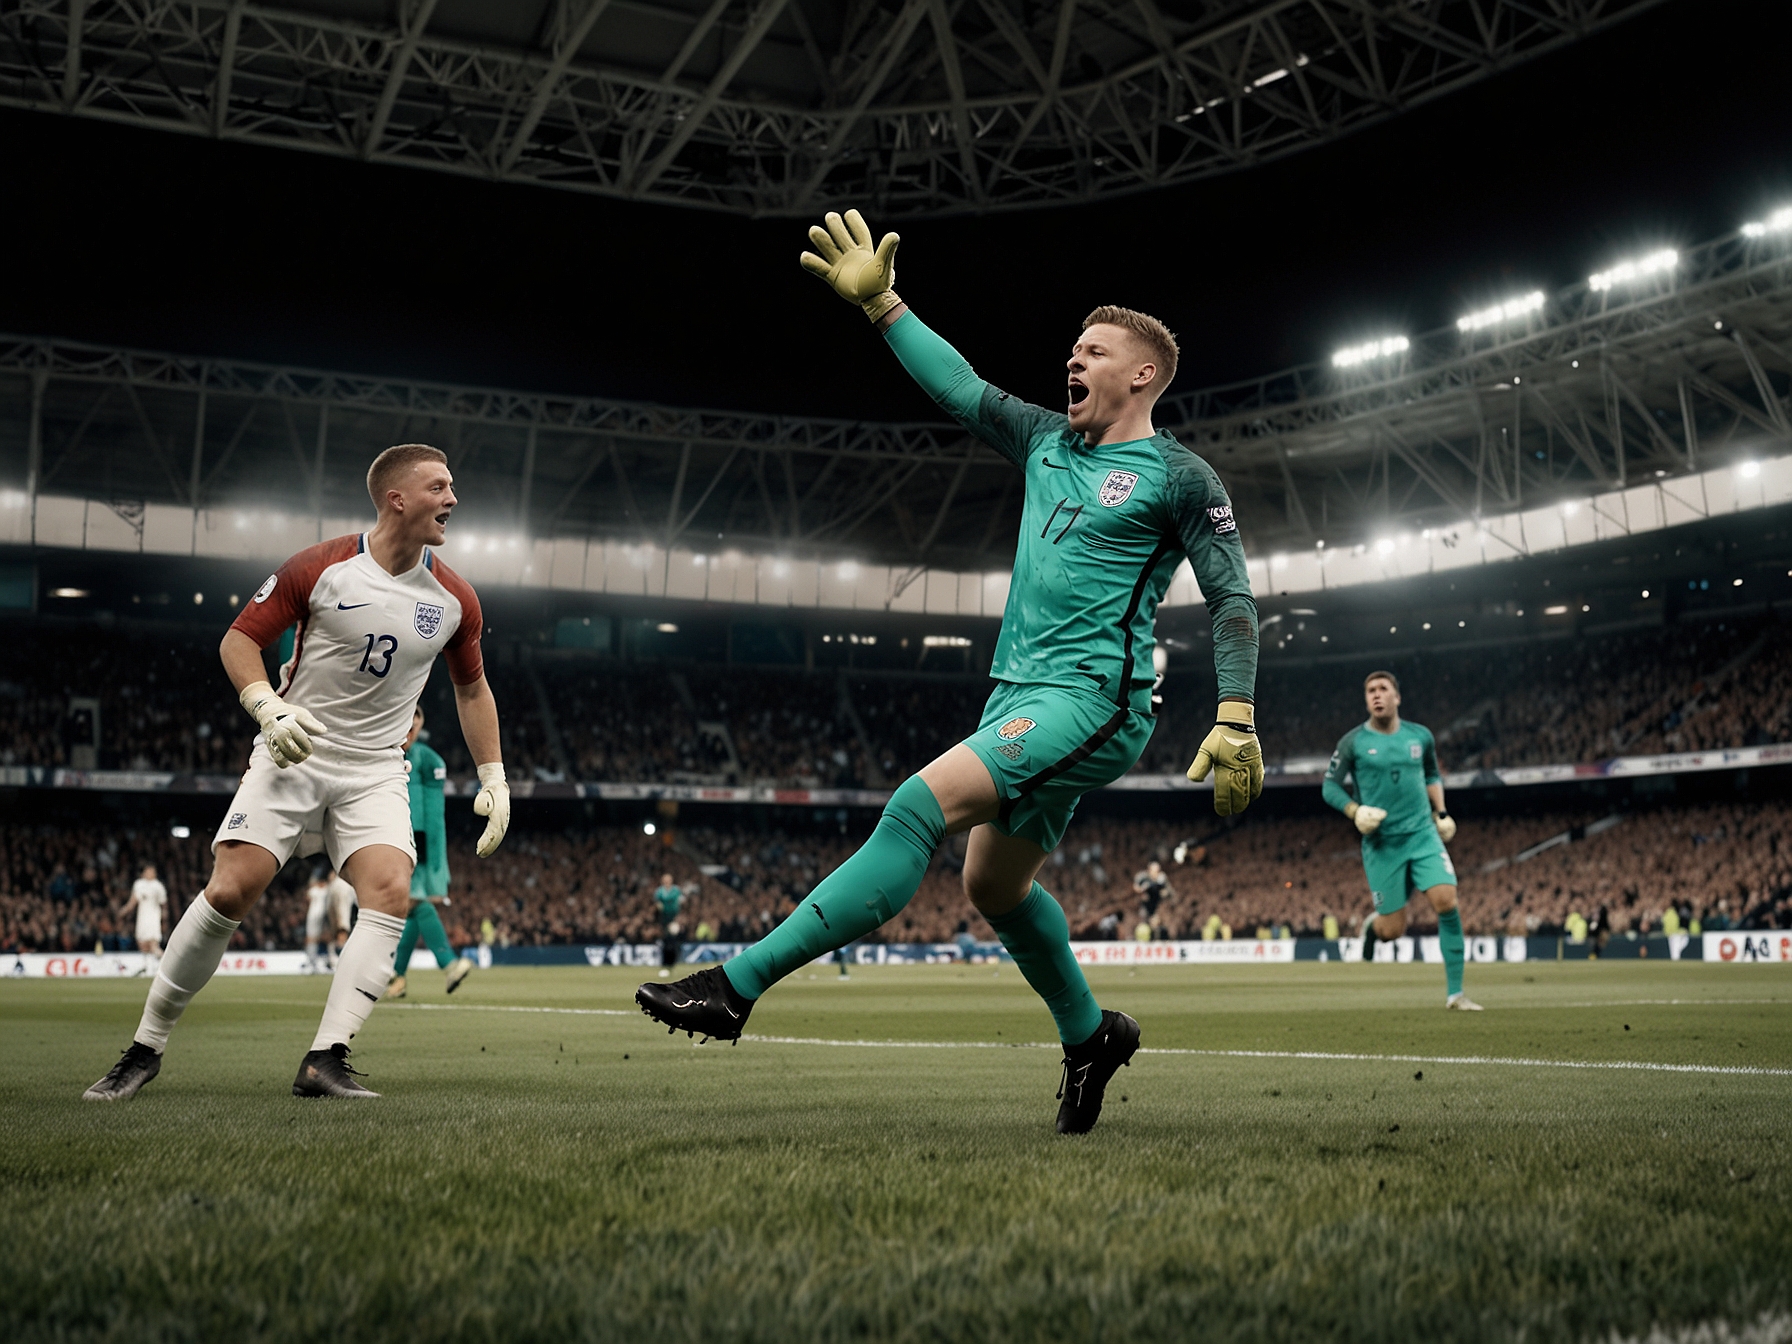 England's goalkeeper Jordan Pickford making a crucial save in the second half to maintain England's lead, showcasing the team's defensive resilience and unity.